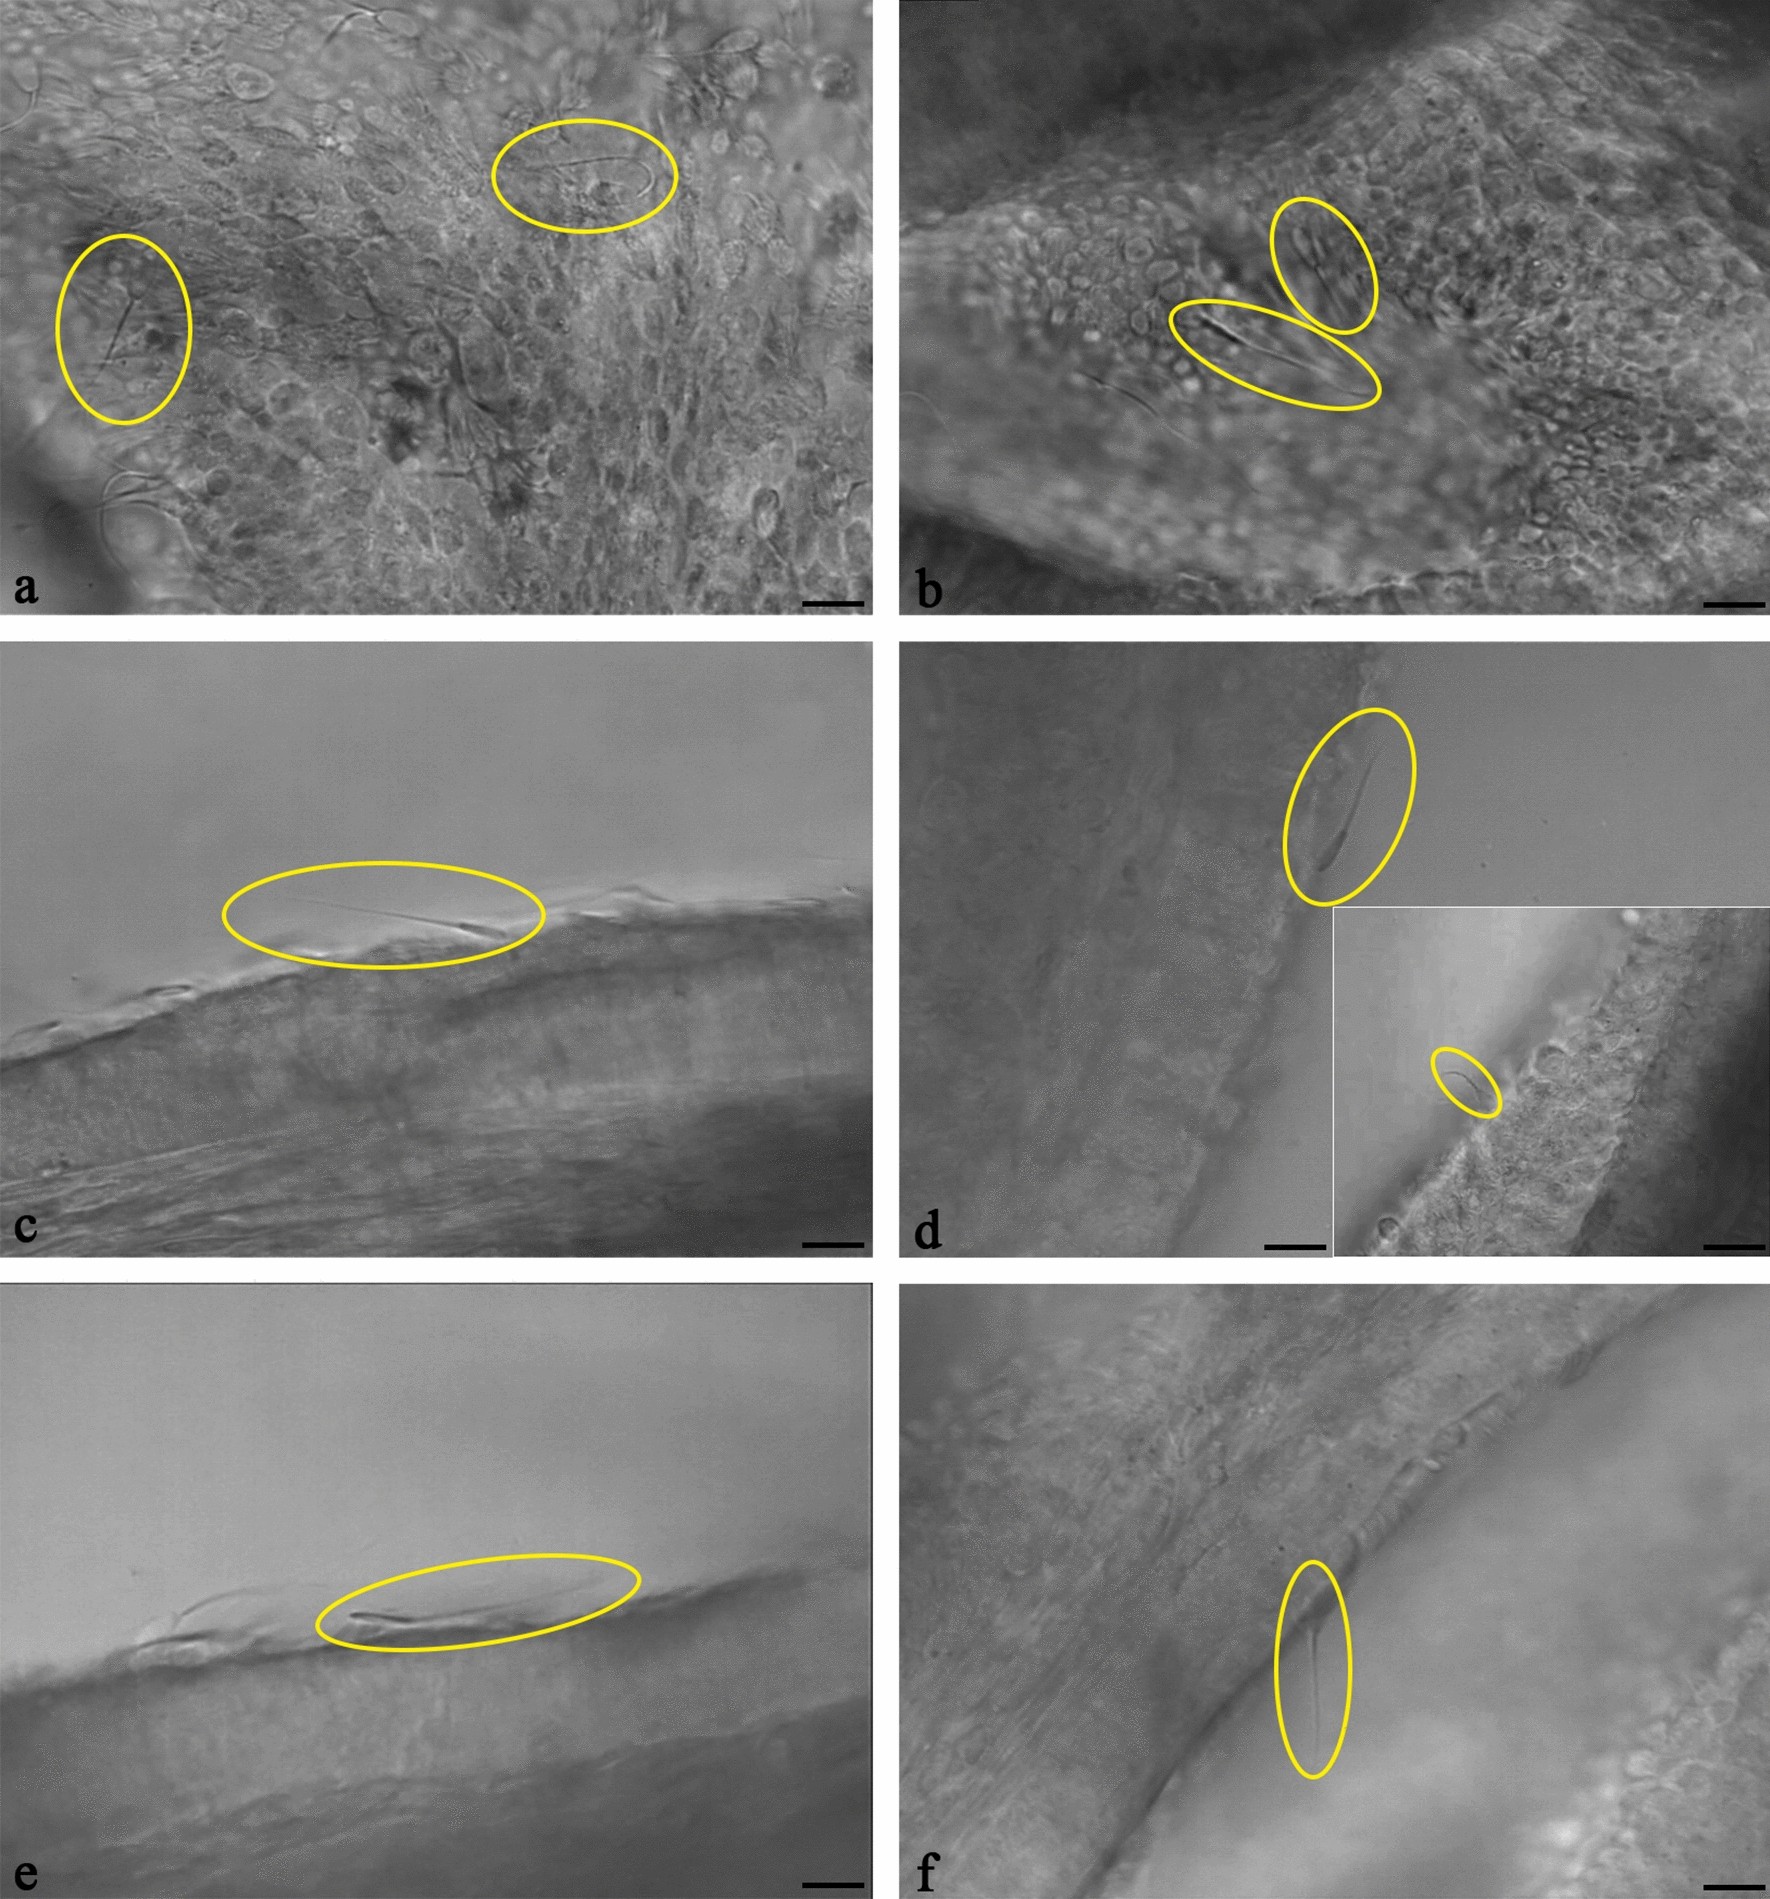 Bovine sperm-oviduct interactions are characterized by specific sperm behaviour, ultrastructure and tubal reactions which are impacted by sex sorting Scientific Reports picture